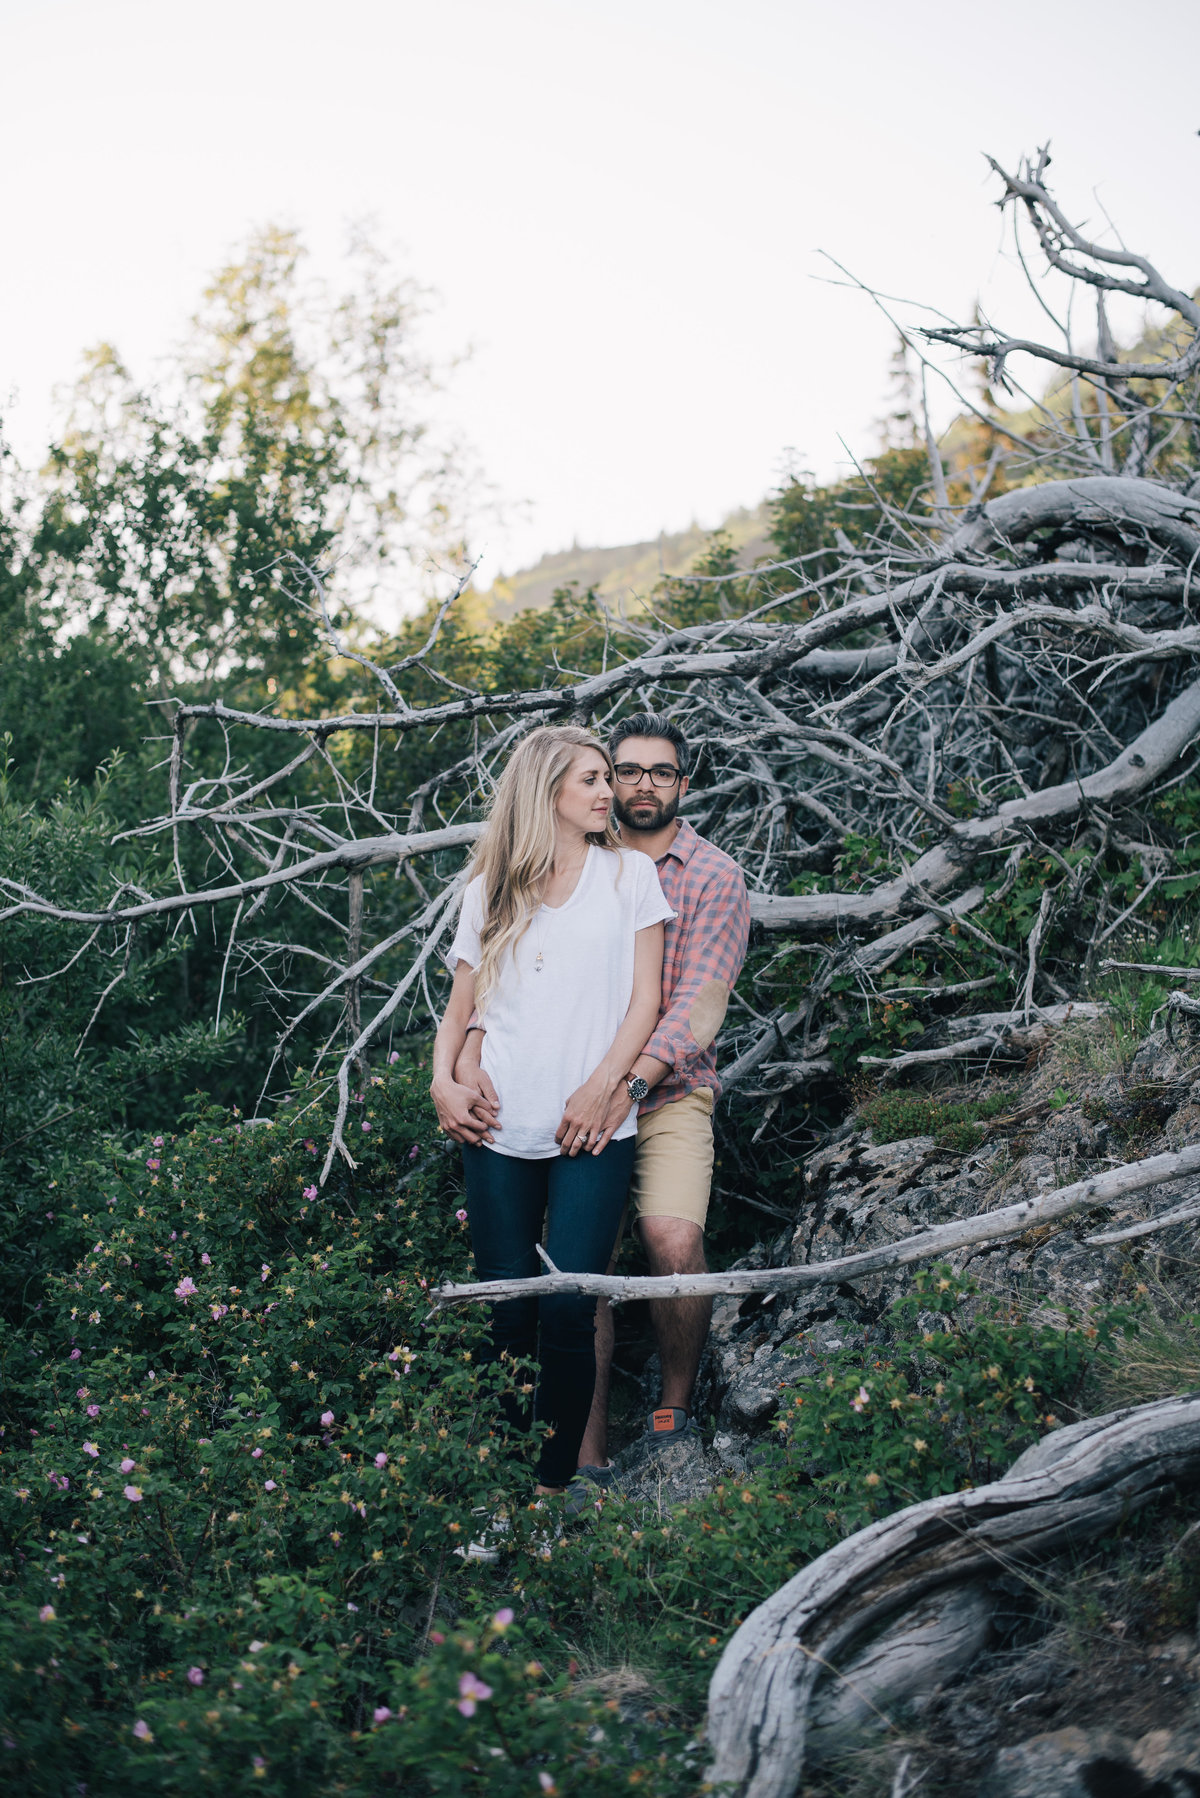 009_Erica Rose Photography_Anchorage Engagement Photographer_Featured